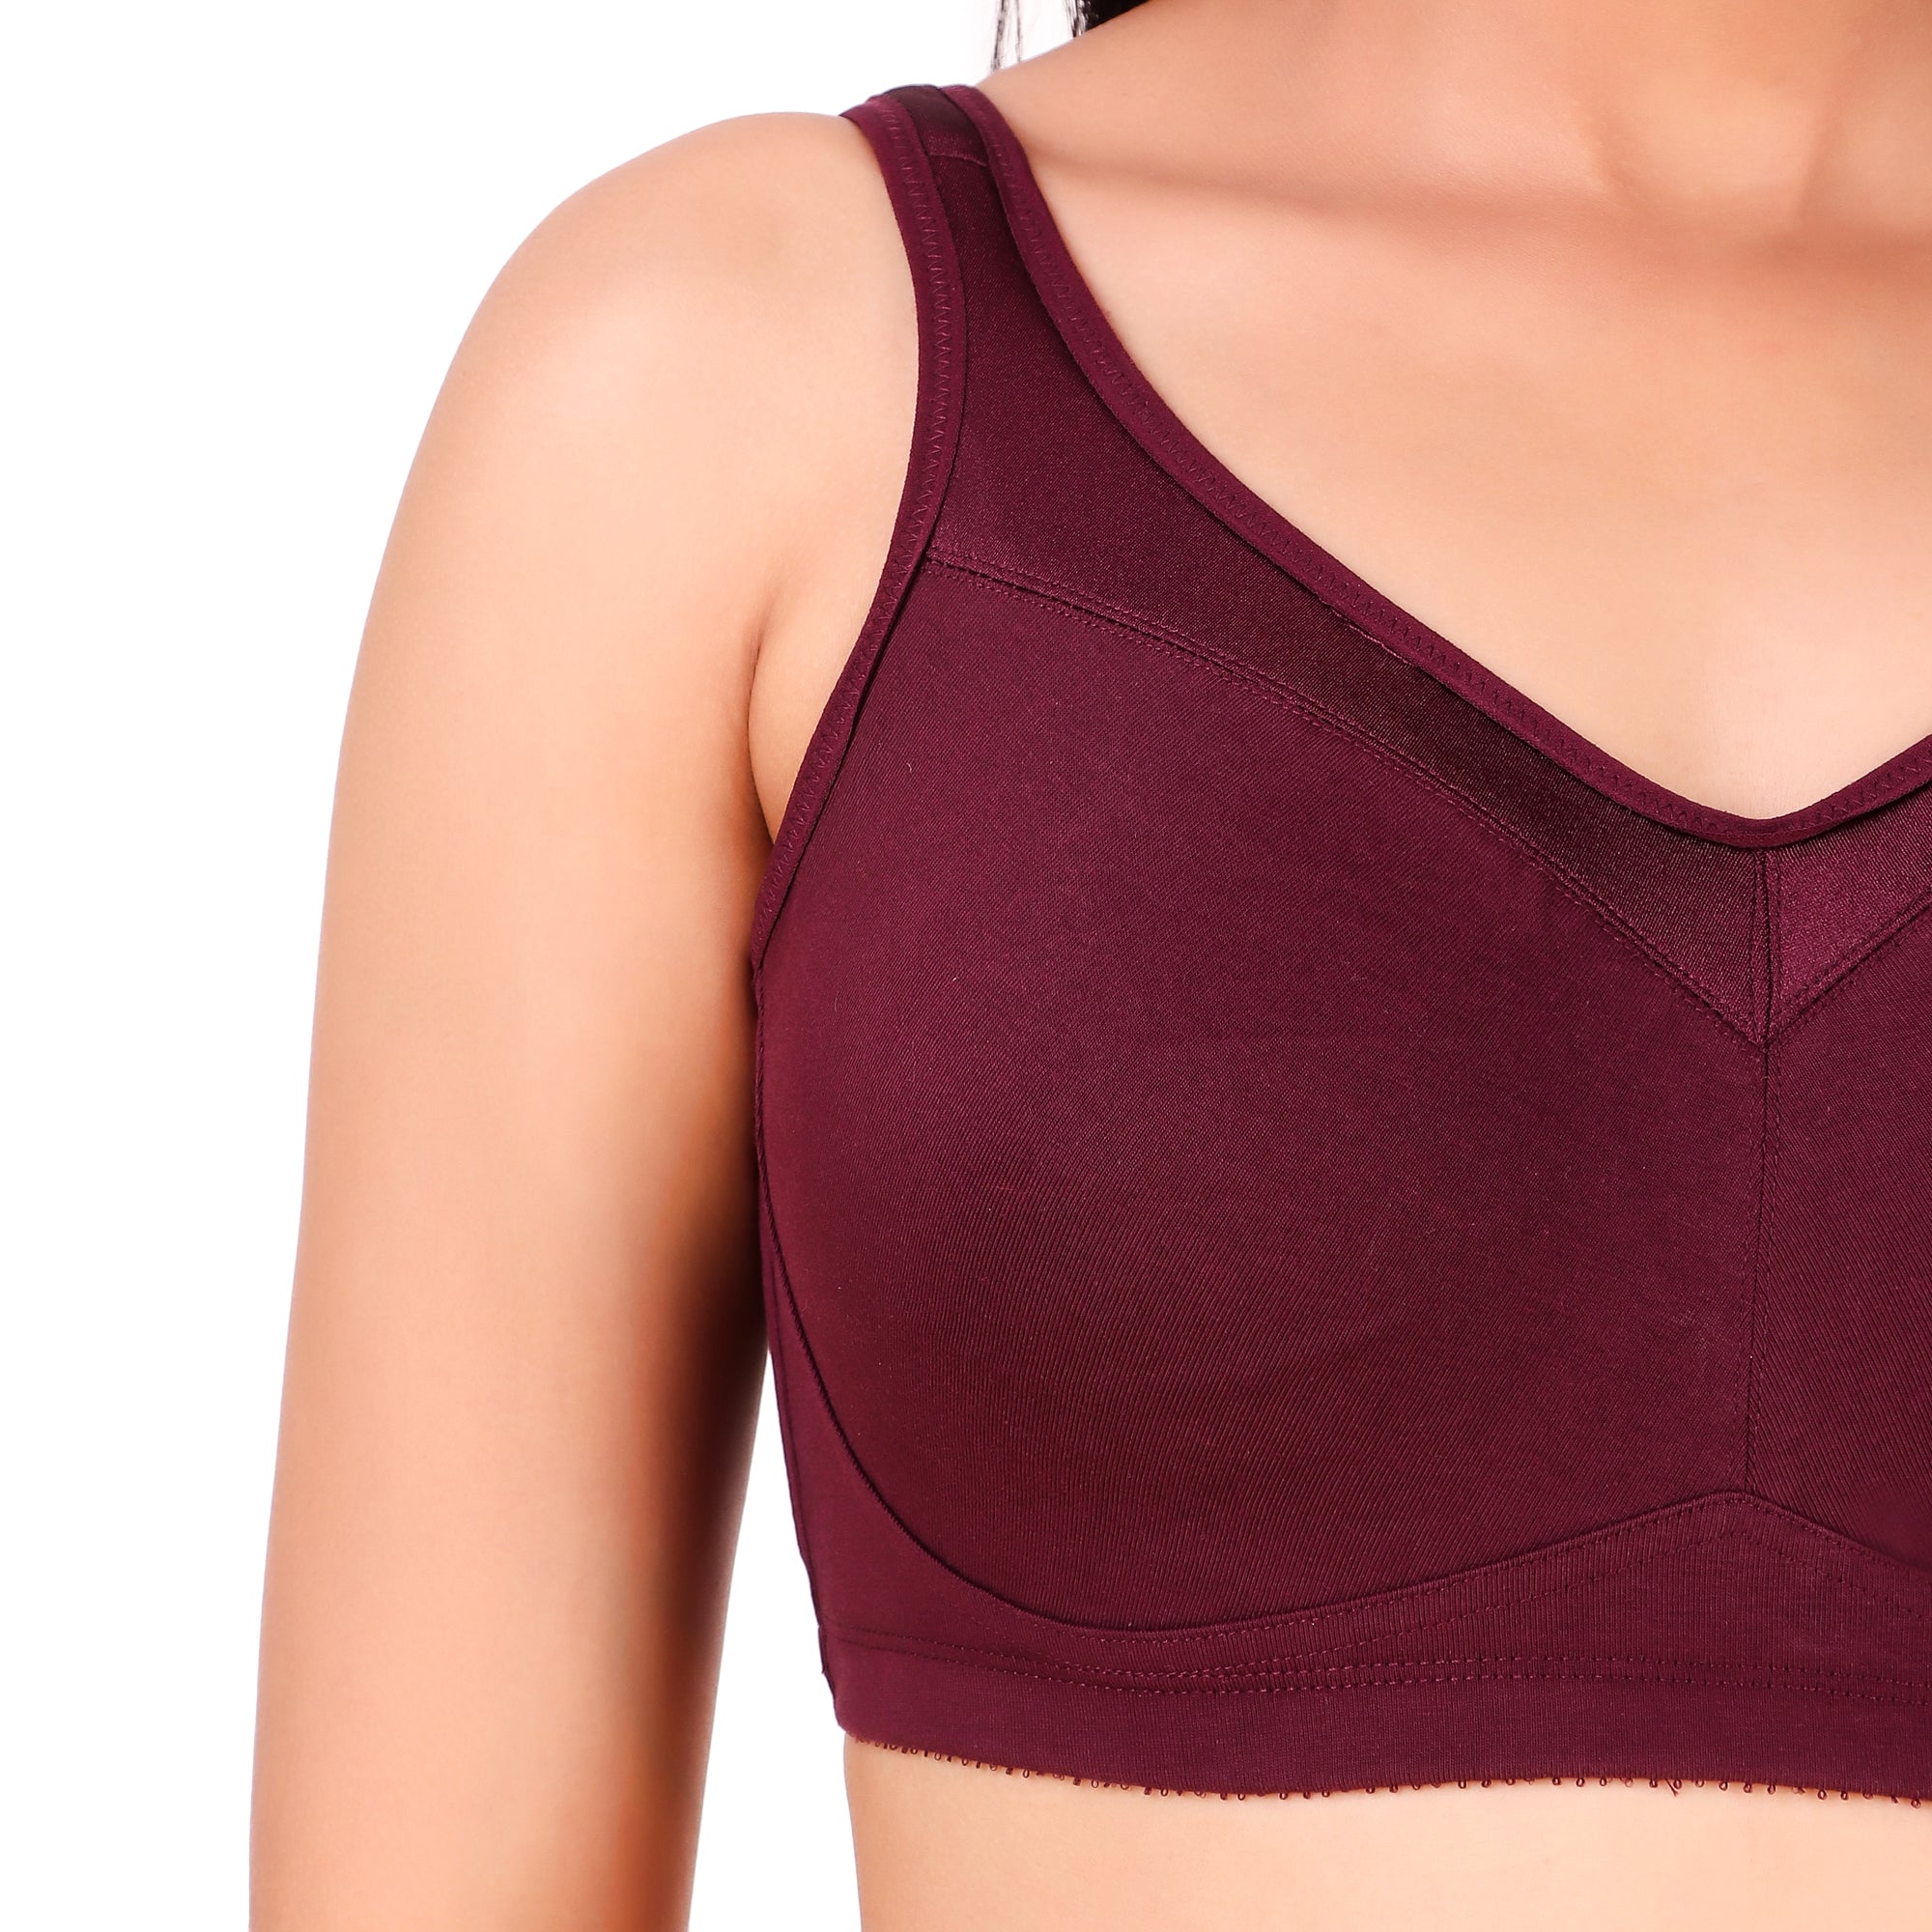 Enamor-A112 Smooth Lift Classic Bra - Stretch Cotton Non-Padded Wirefree